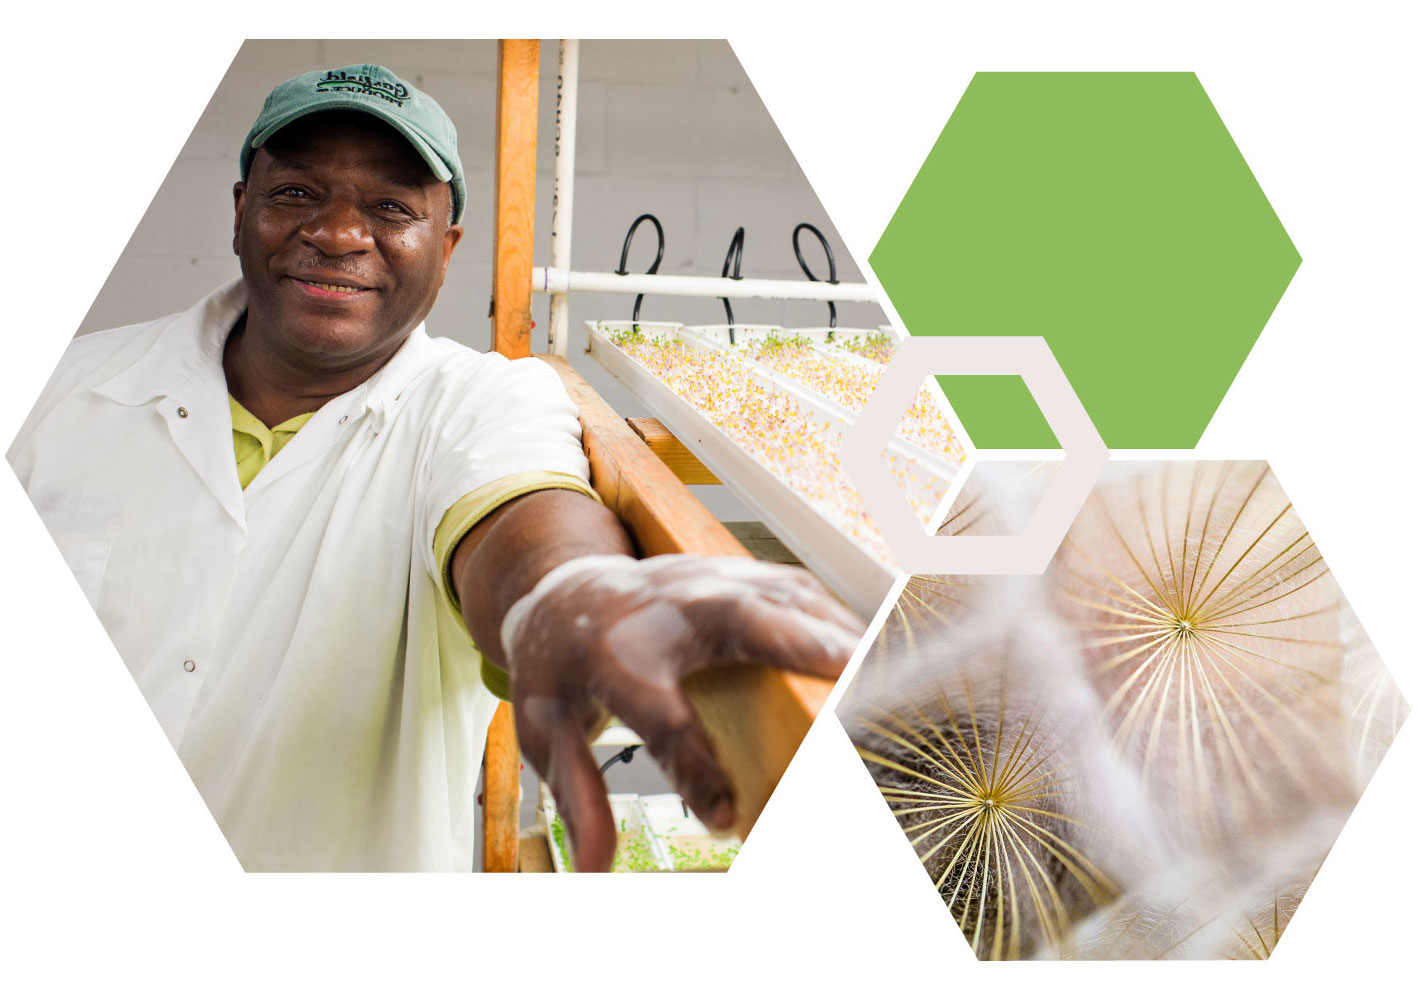 Hexagon collage featuring image of man standing next to his farmed sprouts, and an image of a dandelion with seeds